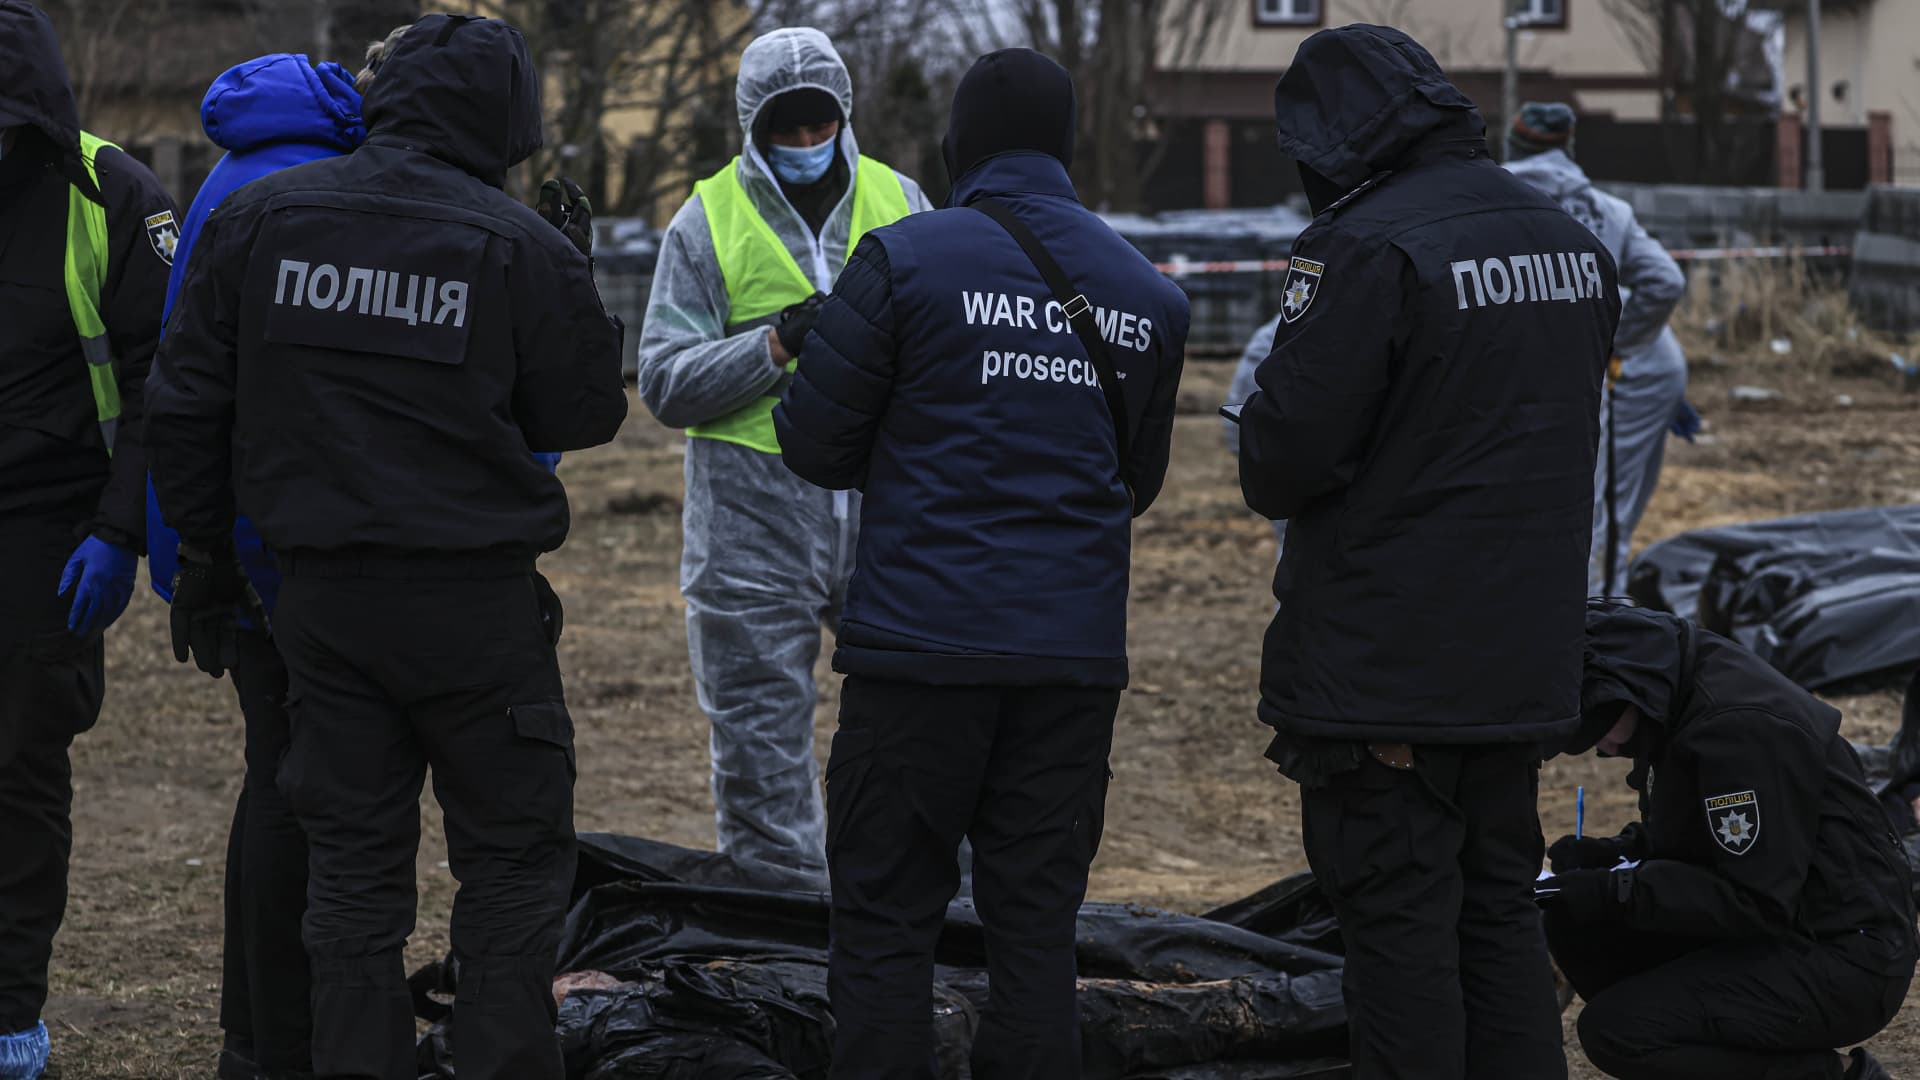 (EDITORS NOTE: Image depicts death) Officials continue to exhume the bodies of civilians who died during the Russian attacks, from second mass grave, found at backyard of St. Andrea's Church in Bucha, Kyiv Oblast, Ukraine on April 13, 2022. 